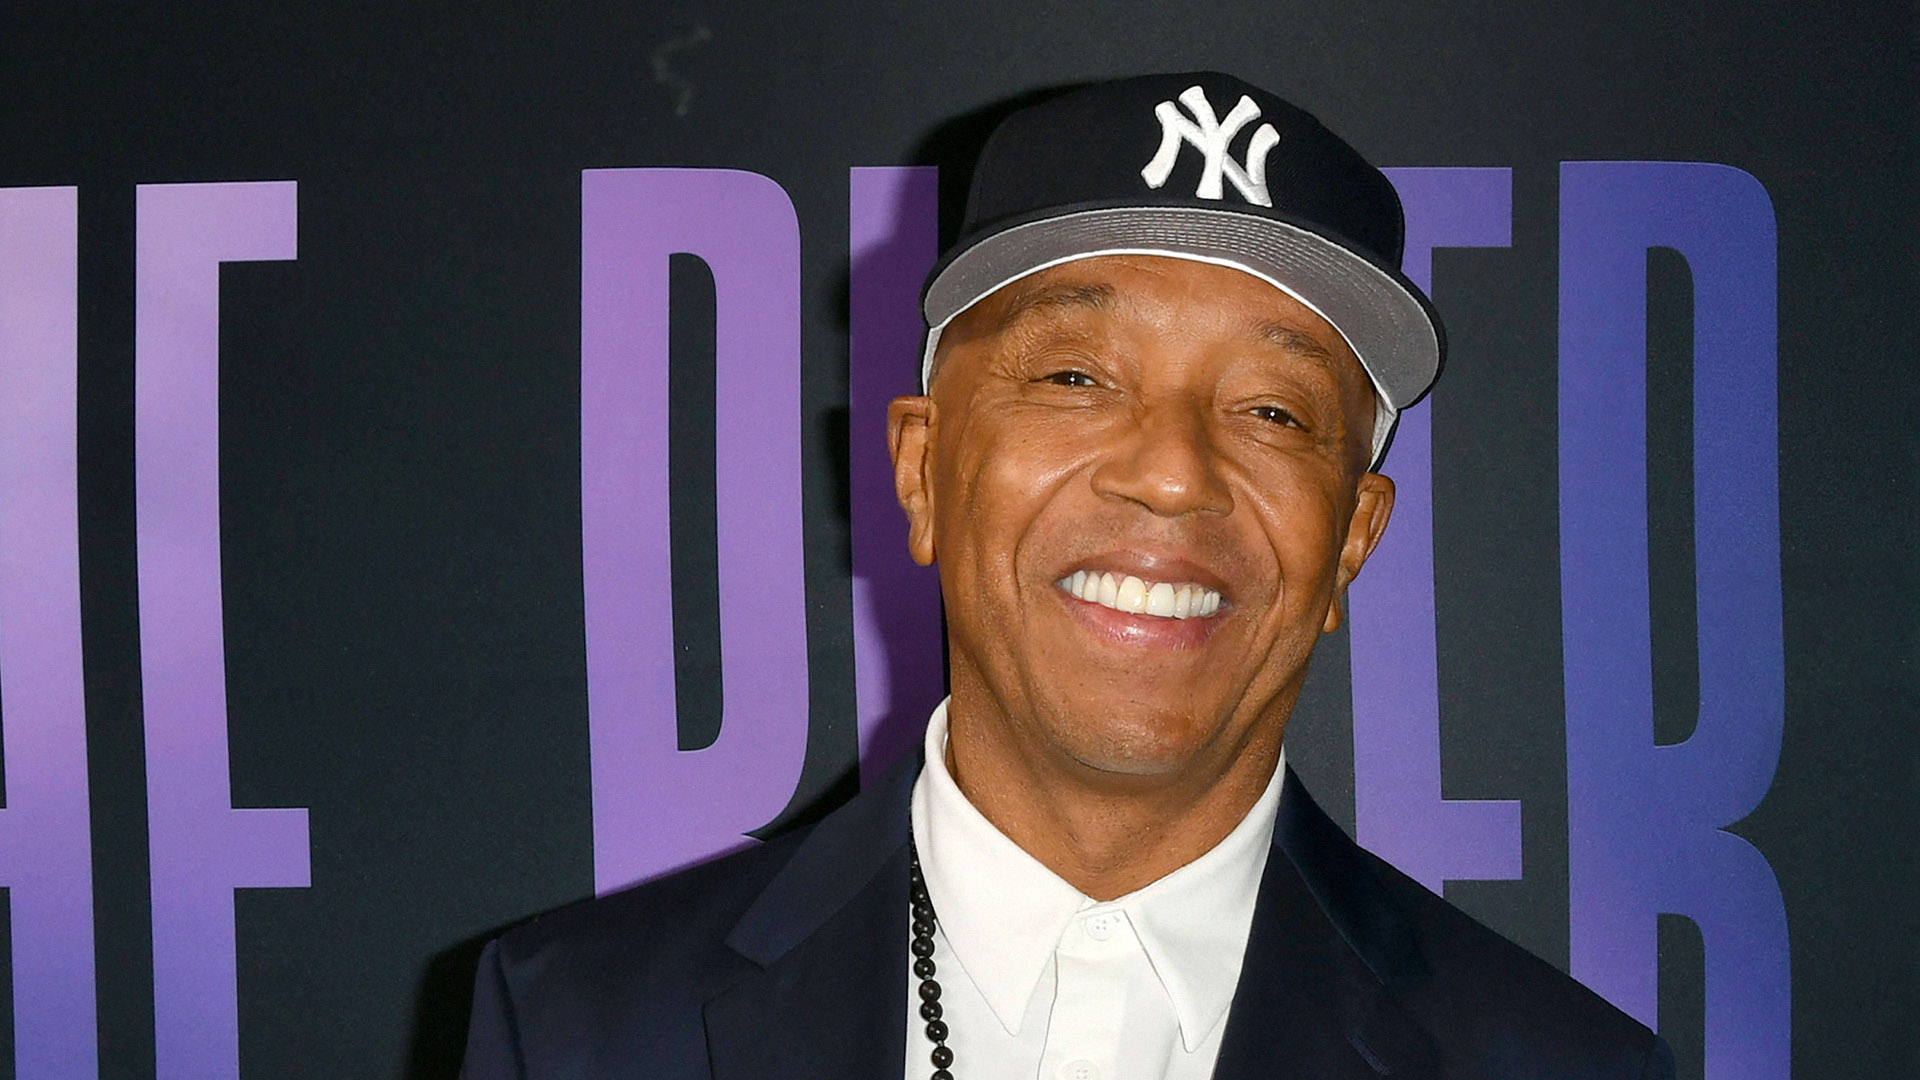 Russell Simmons' Sexual Assault Controversy Explained: Why Isn't He in Jail?